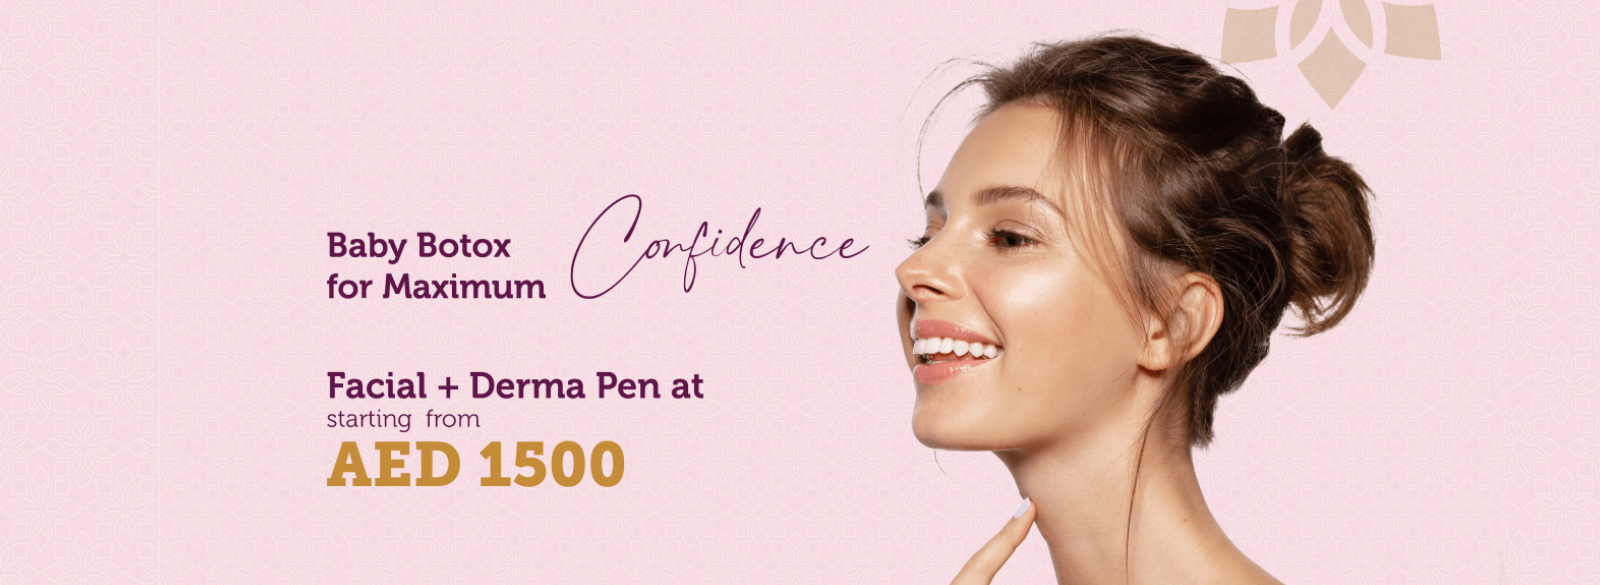 Baby Botox for Max confidence – AED 1500